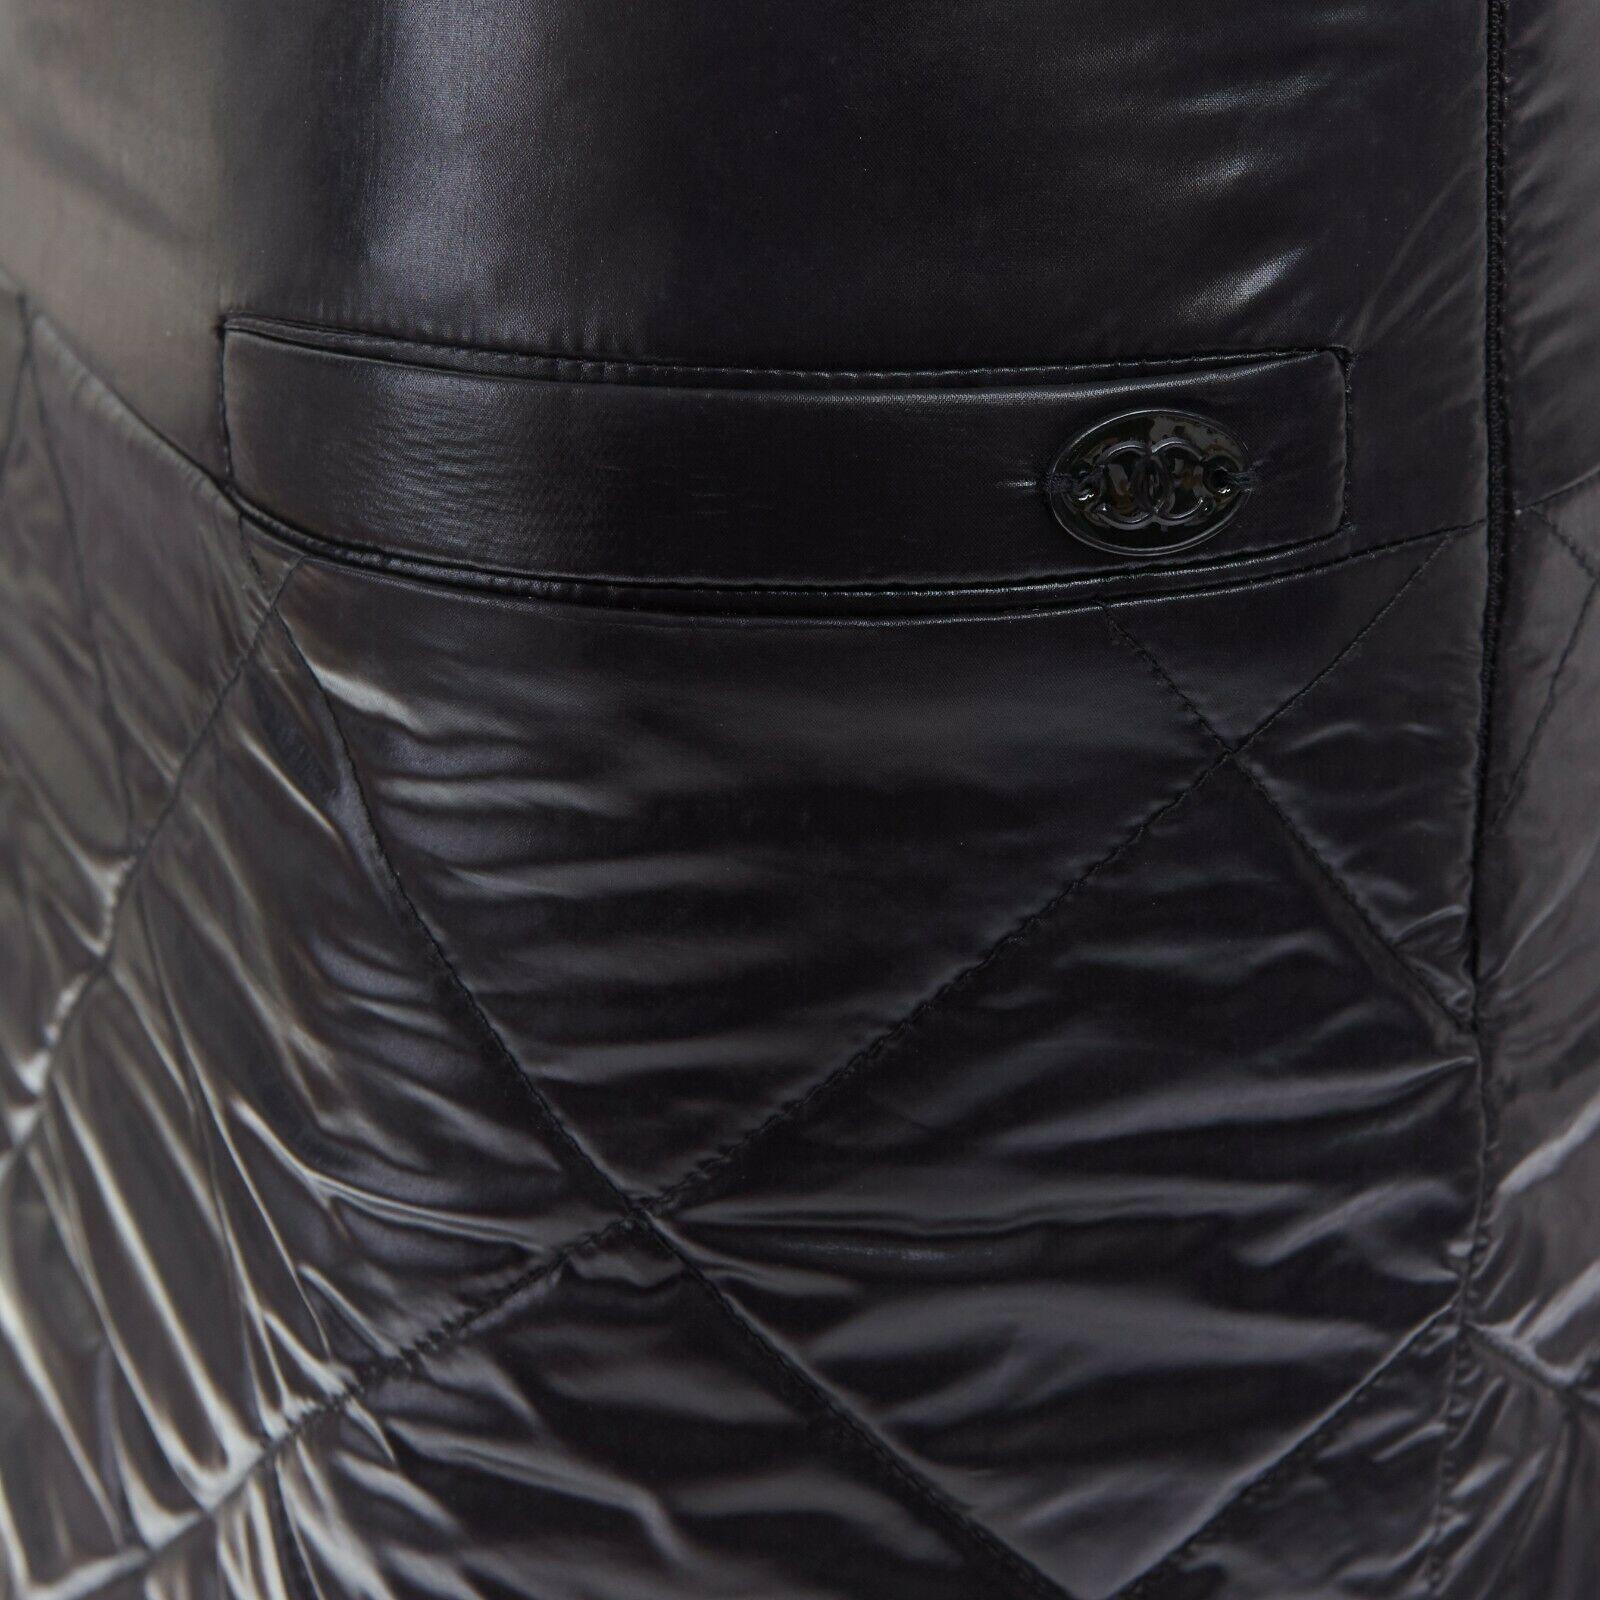 CHANEL 06A black quilted nylon dual pocket CC charm mini skirt FR34 XS

CHANEL
FROM THE 2006 COLLECTION
Black nylon. 
Tonal diamond quilting. 
Dual front pockets. 
Tonal CC charm on pocket. 
Concealed side zip closure. 
Mini skirt.
Made in